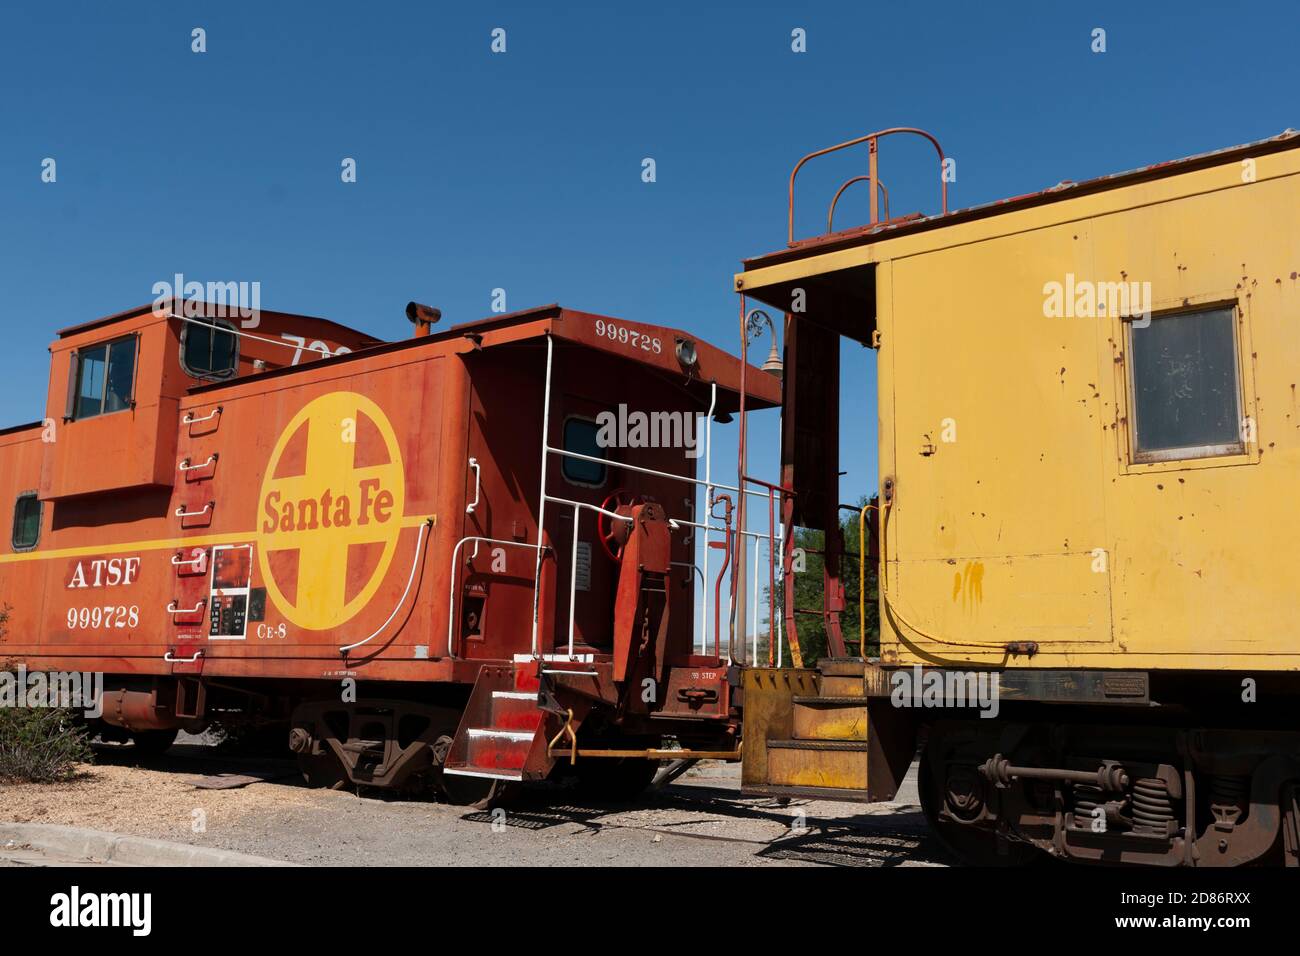 Barstow  USA   October 2 2015: Old bright orange and yellow colored Santa Fe train engine and carraige under blue sky. Stock Photo